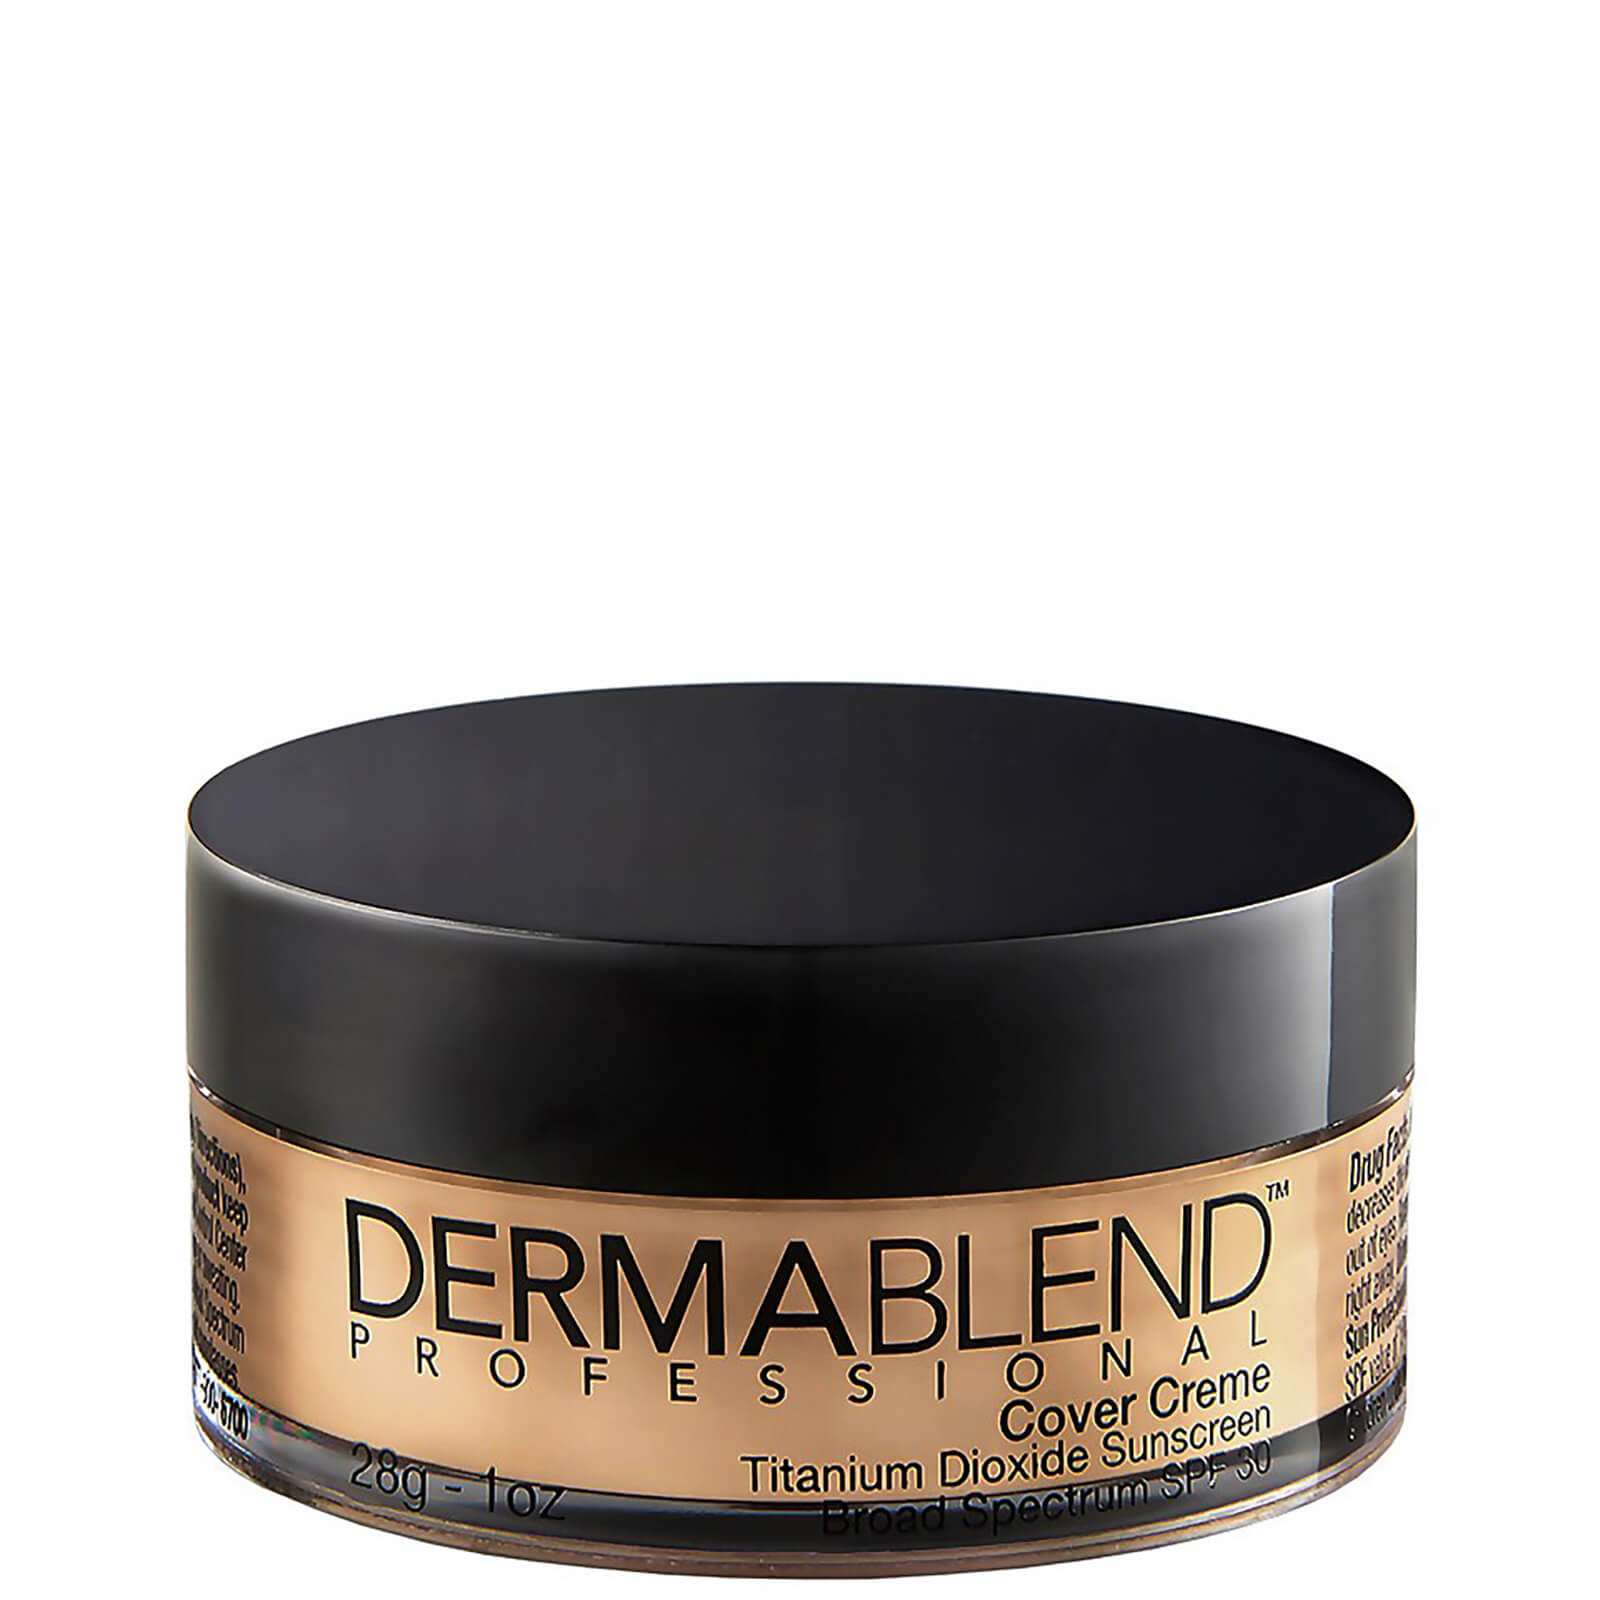 Dermablend Cover Creme Full Coverage Foundation With Spf 30 (1 Oz.) In 45w Hazelnut Beige